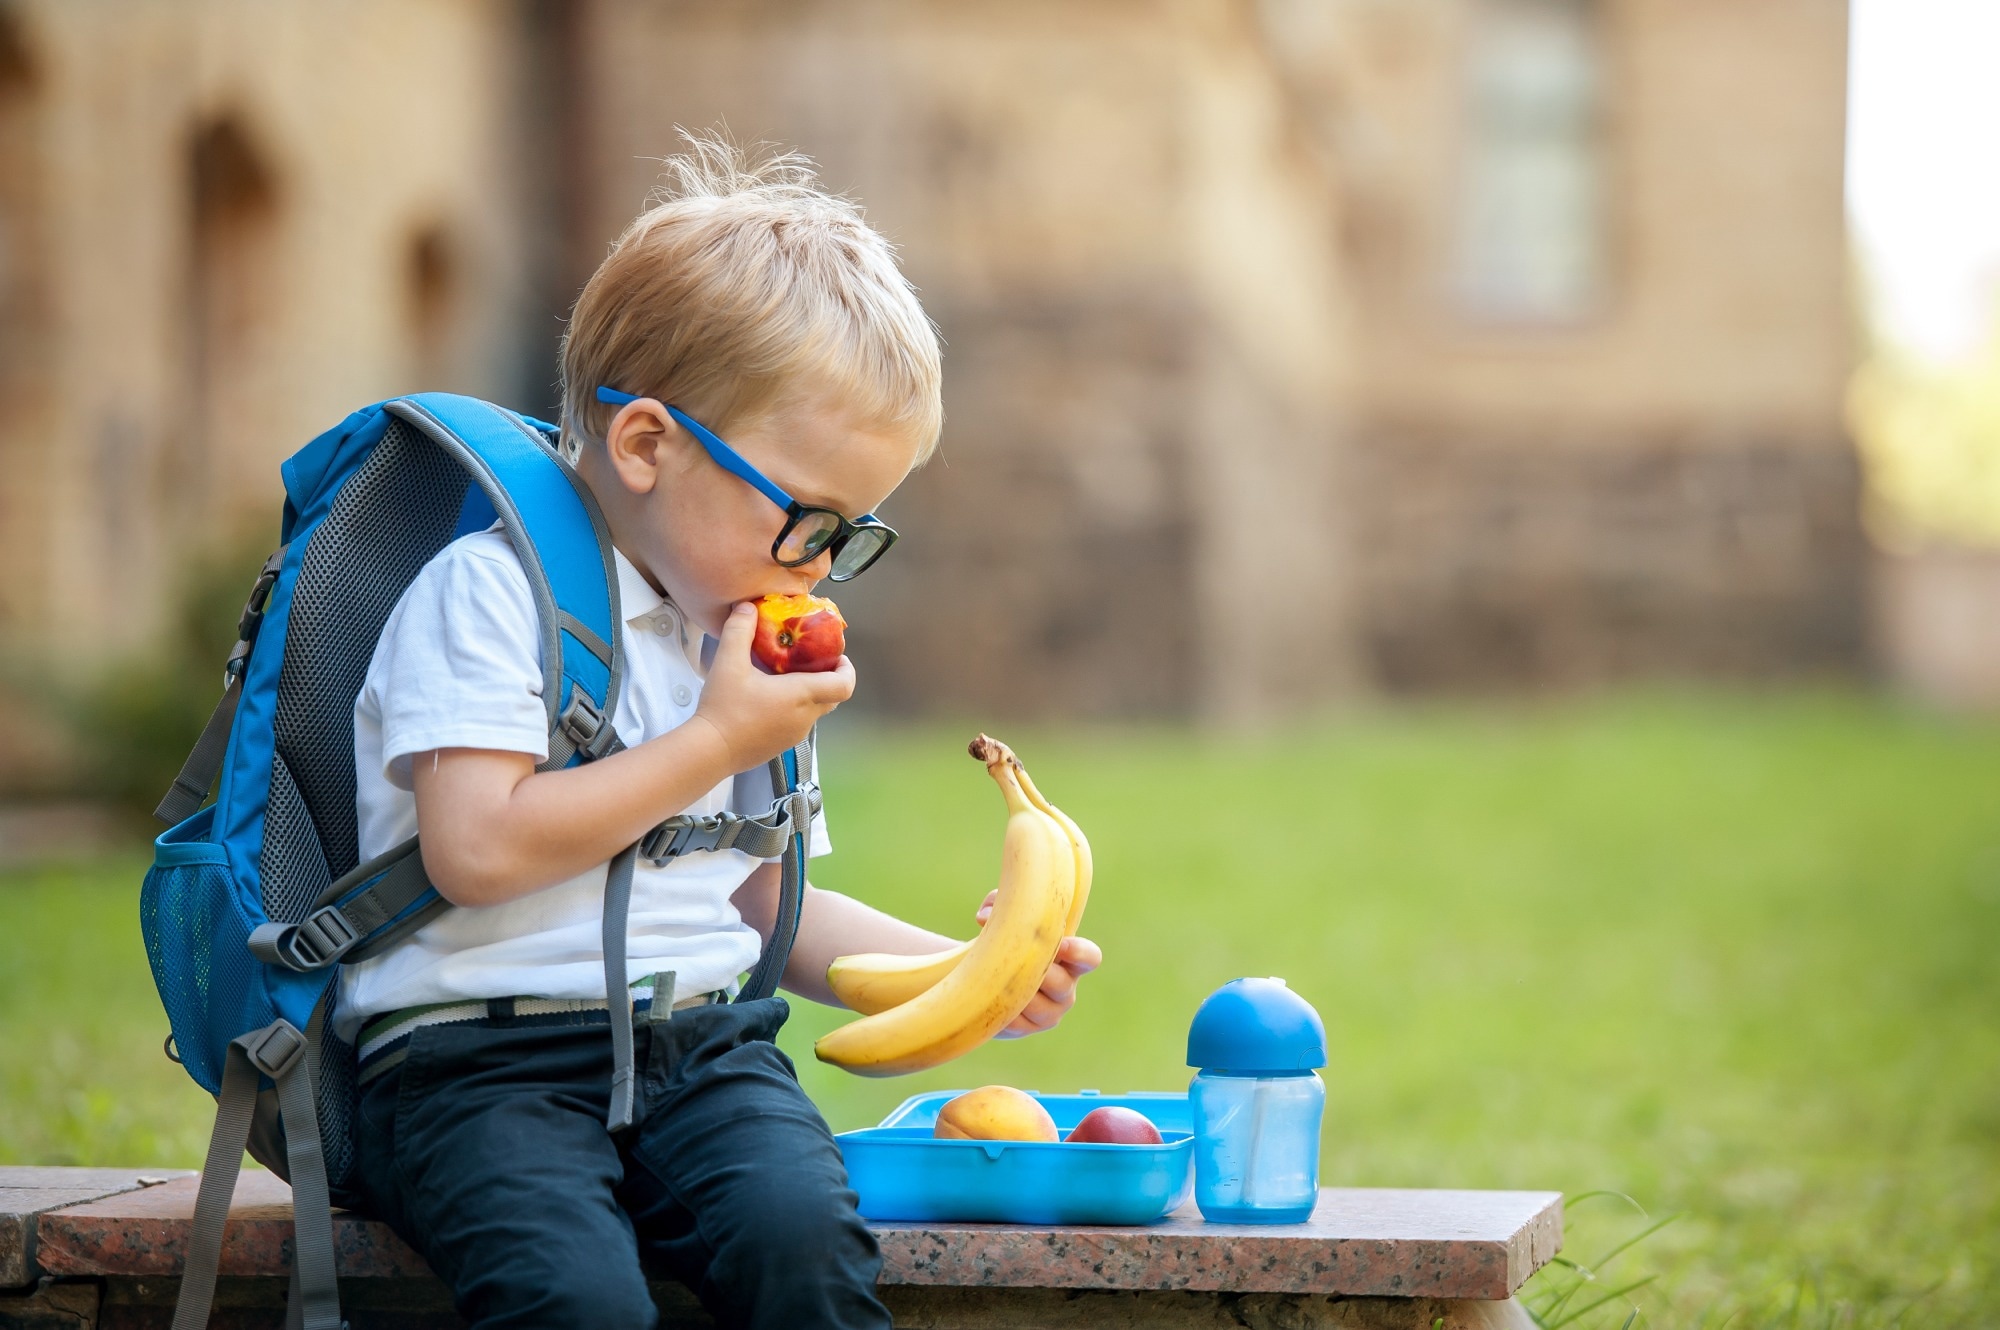 Study: An assessment tool for the international healthy eating report card for preschool-aged children: a cross-cultural validation across Australia, Hong Kong, Singapore, and the United States. Image Credit: Sharomka / Shutterstock